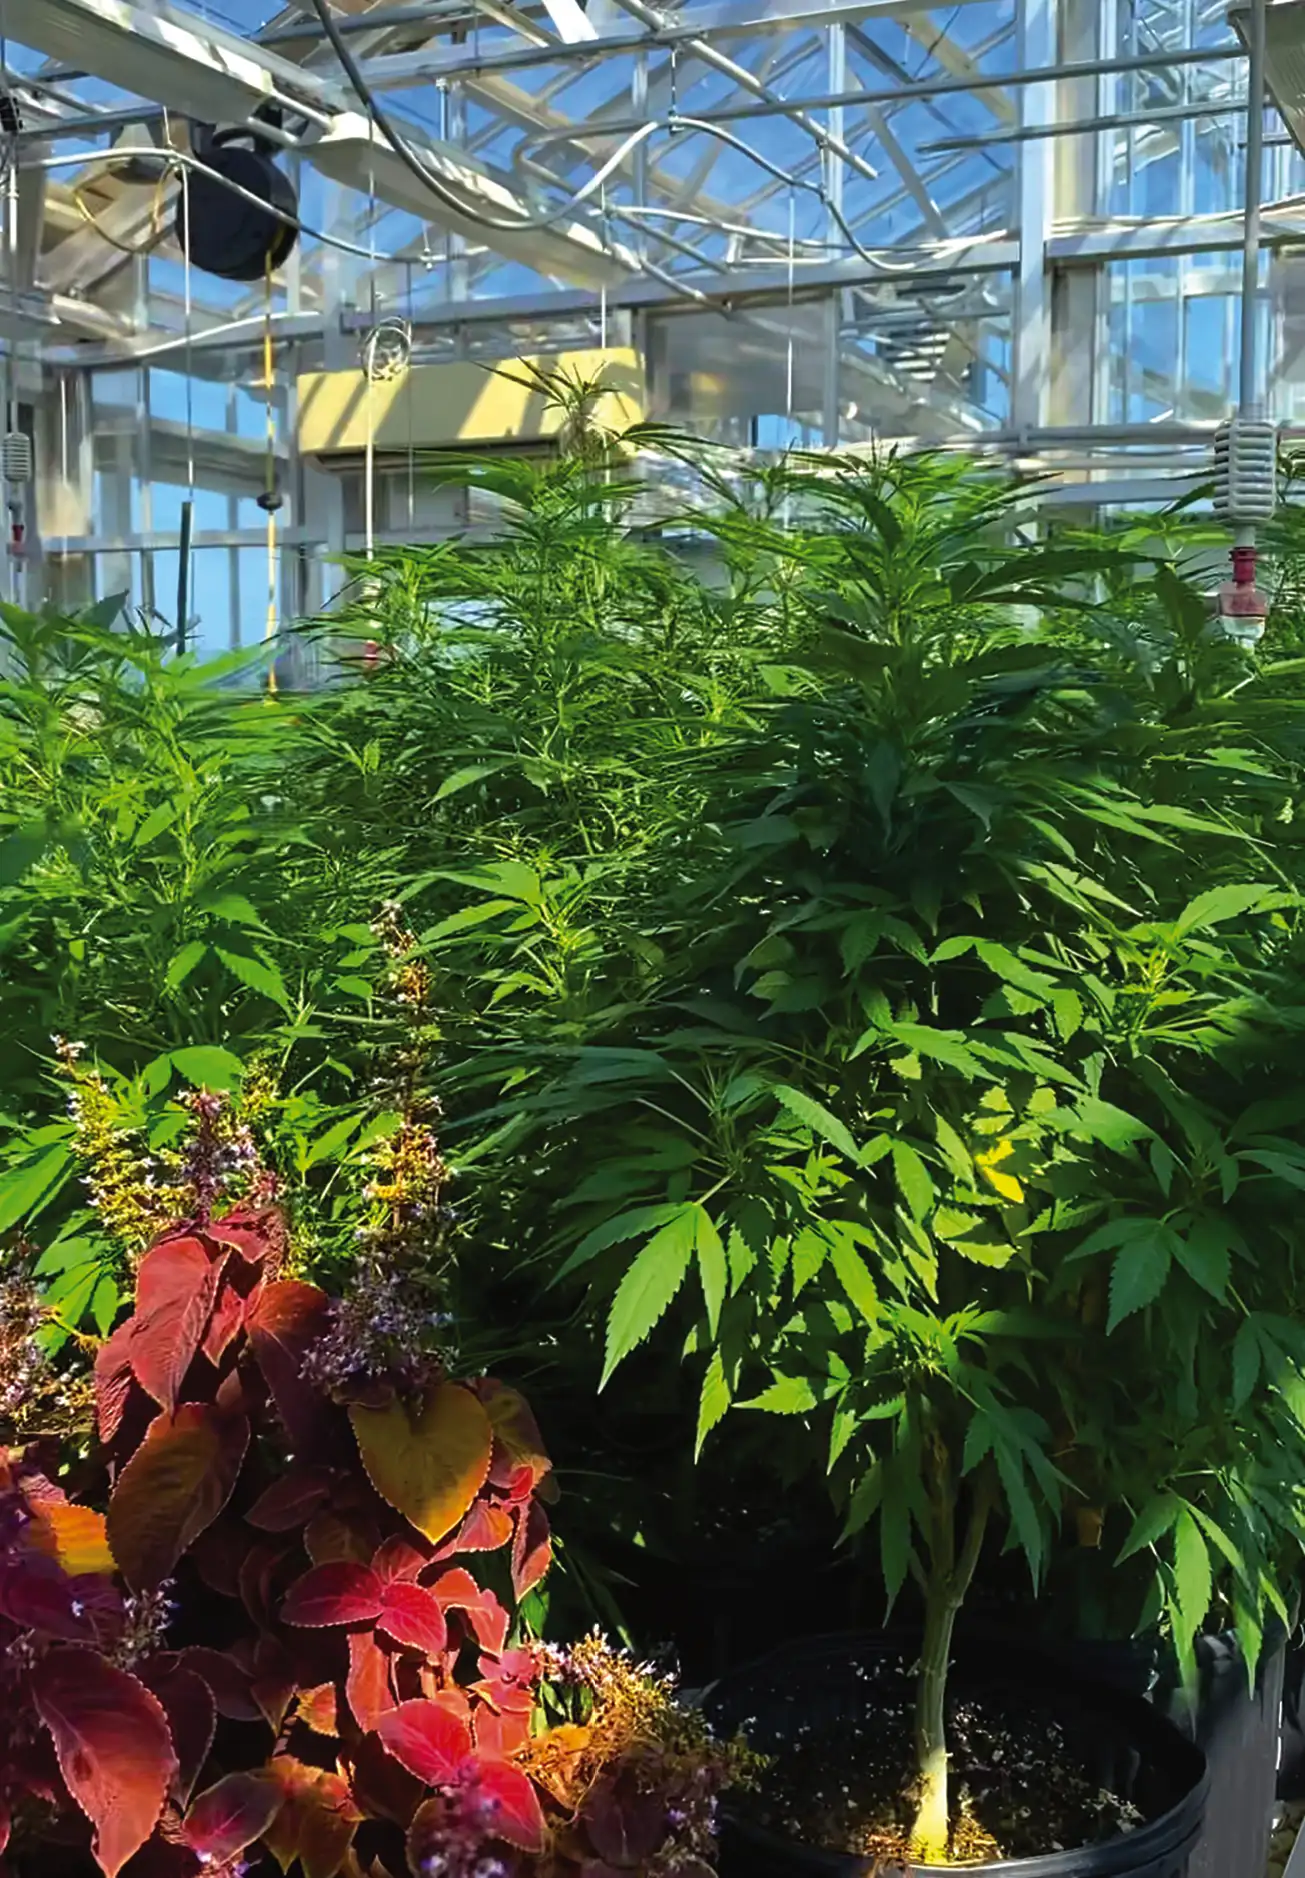 Hemp plants are carefully tended to in the rooftop greenhouse of the Cohen Science Center. Far right, Dr. Terzaghi and his student research team analyzed the cannabinoids from the plants during summer research. From left: Krishna Patel ’25, Esther Orlando ’23, Terzaghi, and Hannah Dittus ’25.